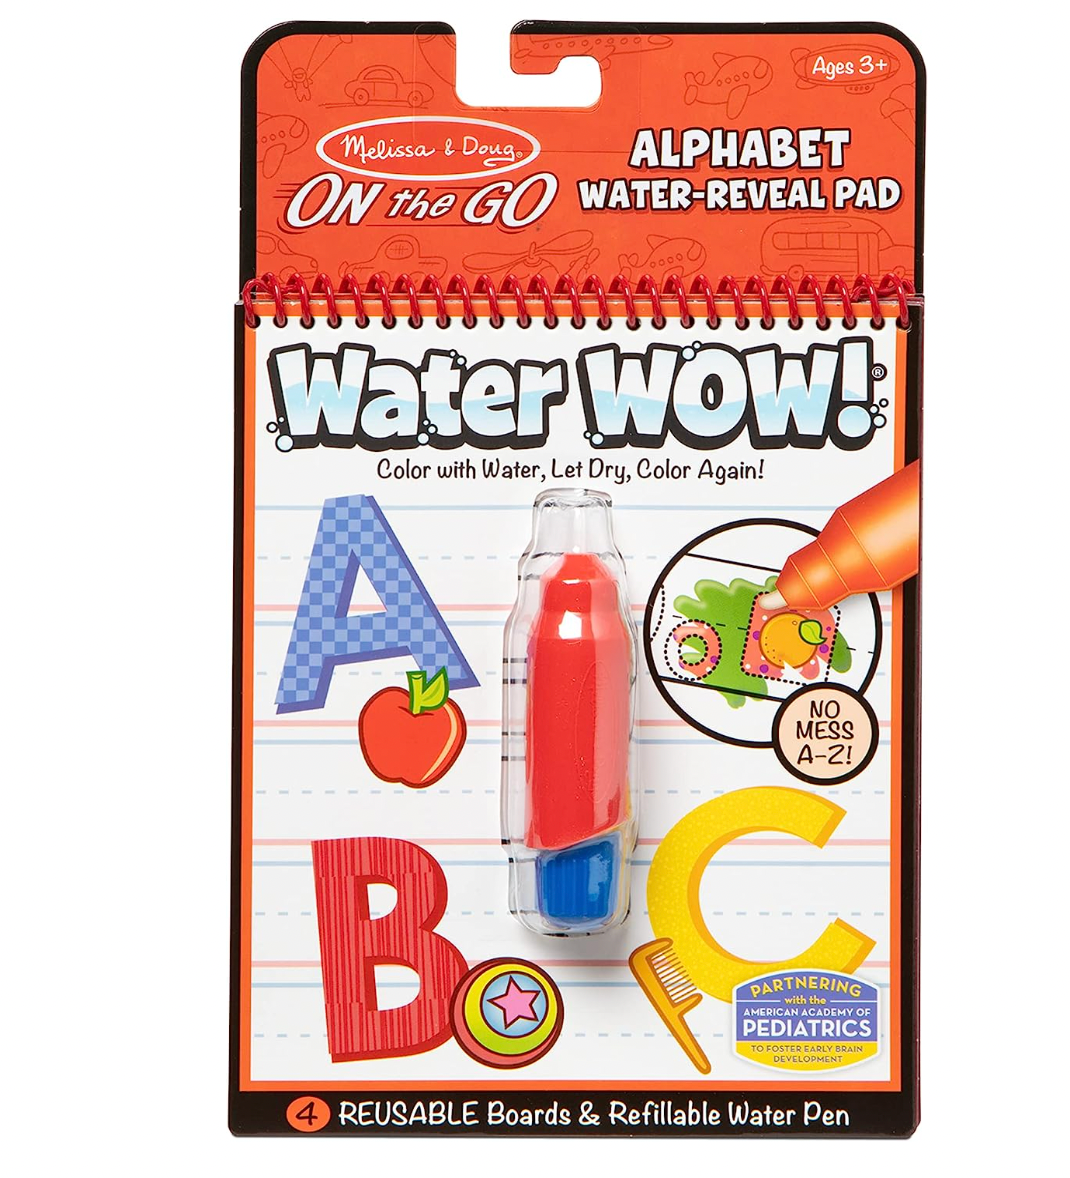 Melissa & Doug On the Go Water Wow! Reusable Water-Reveal Activity